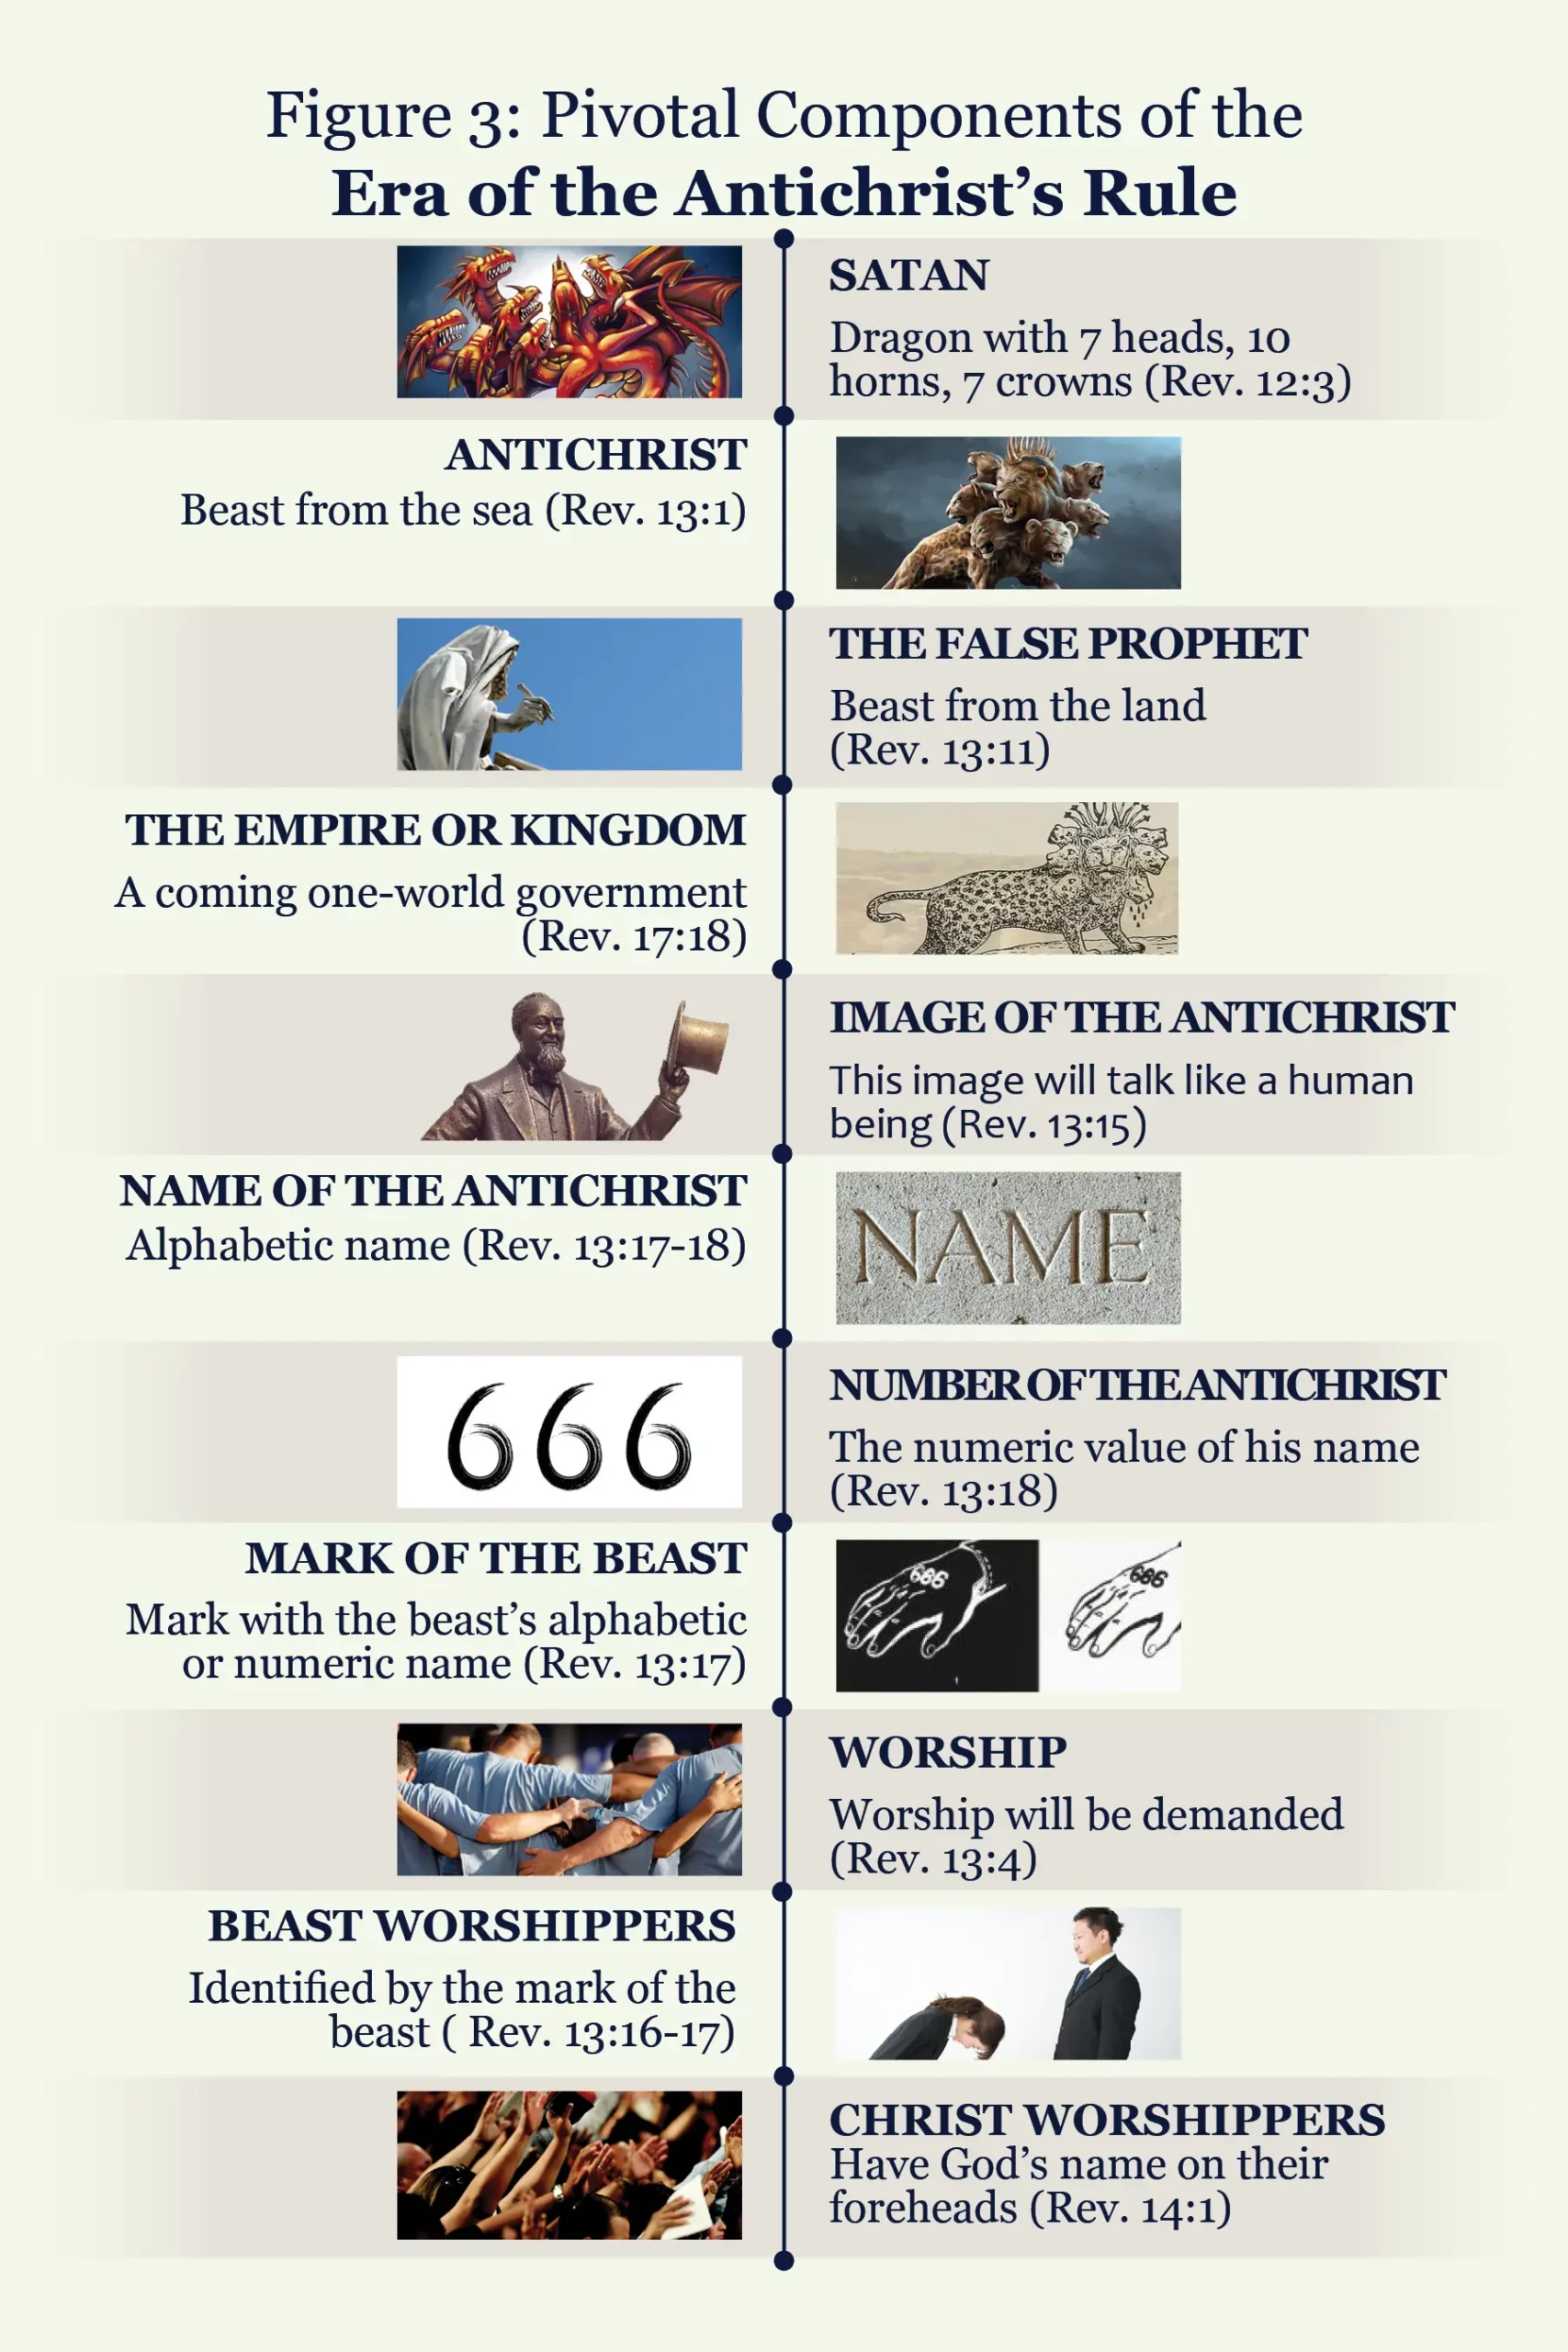 infographic showing the major components of the mark of the beast narrative